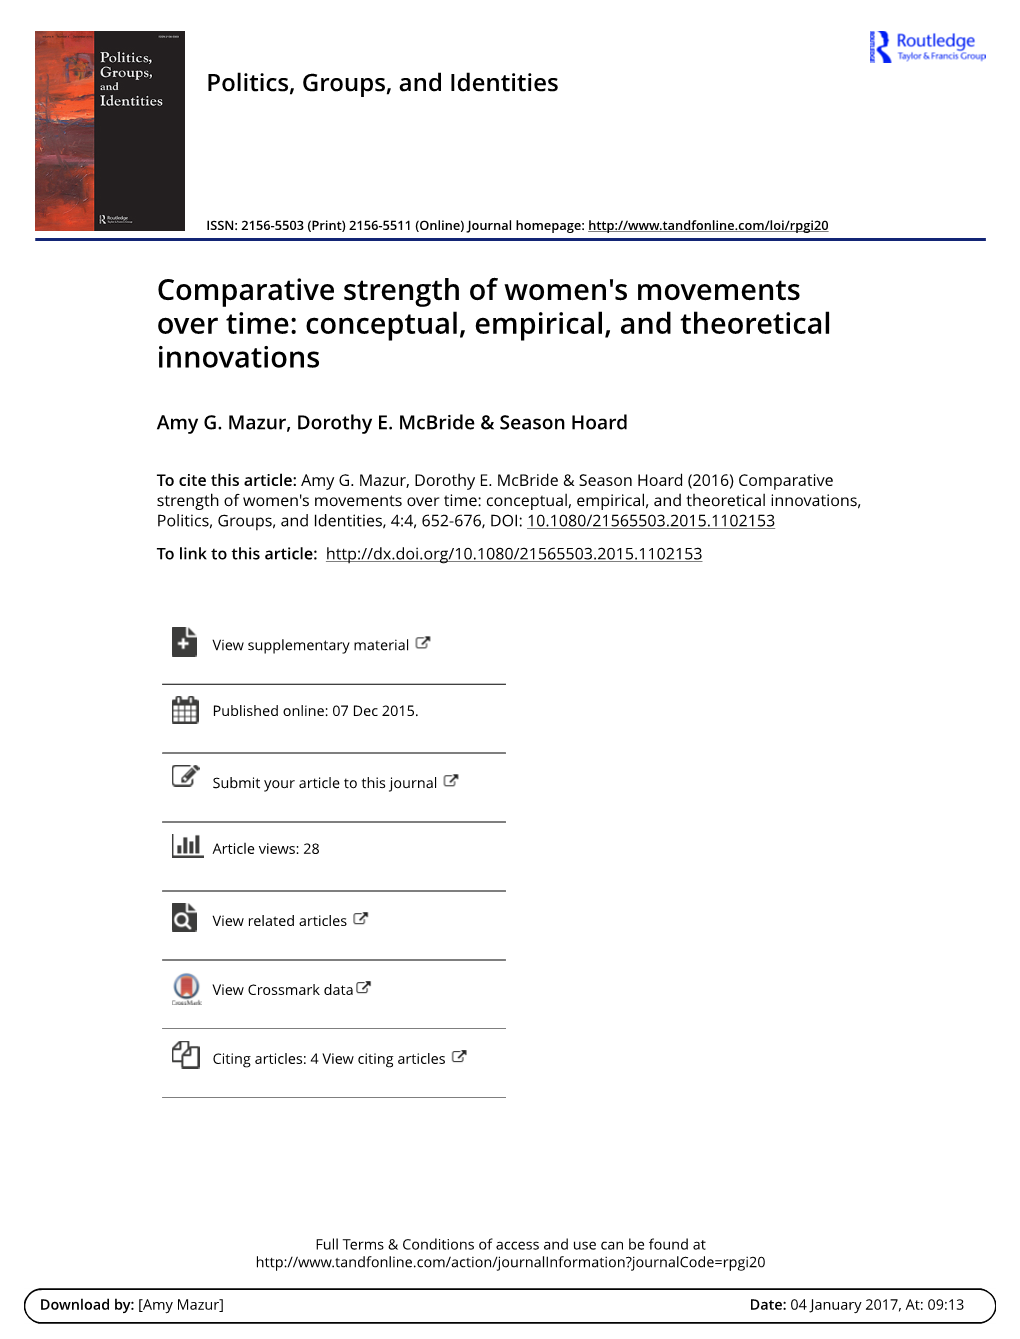 Comparative Strength of Women's Movements Over Time: Conceptual, Empirical, and Theoretical Innovations